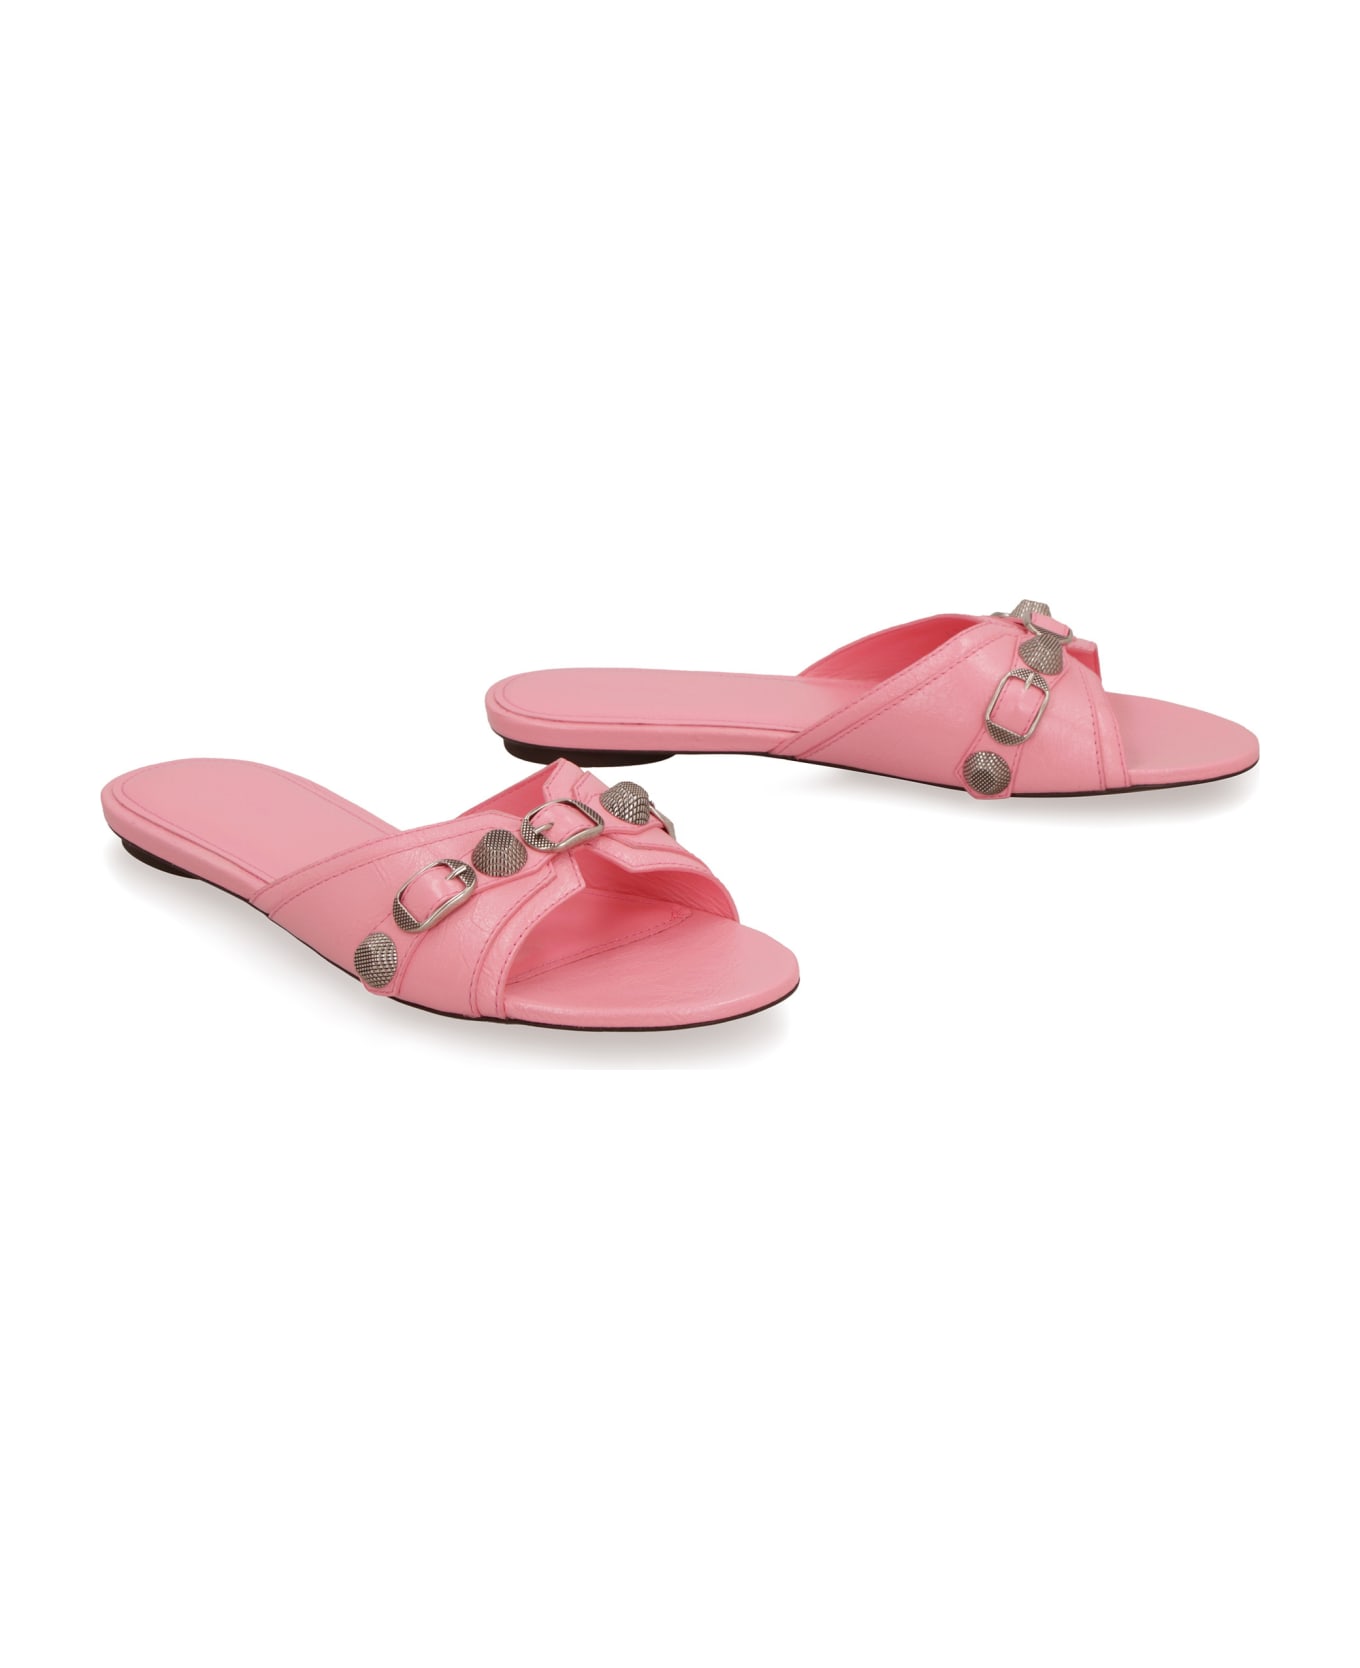 Balenciaga Cagole Leather Slides - Sneakers DEEZEE TS5126K-10 Pink